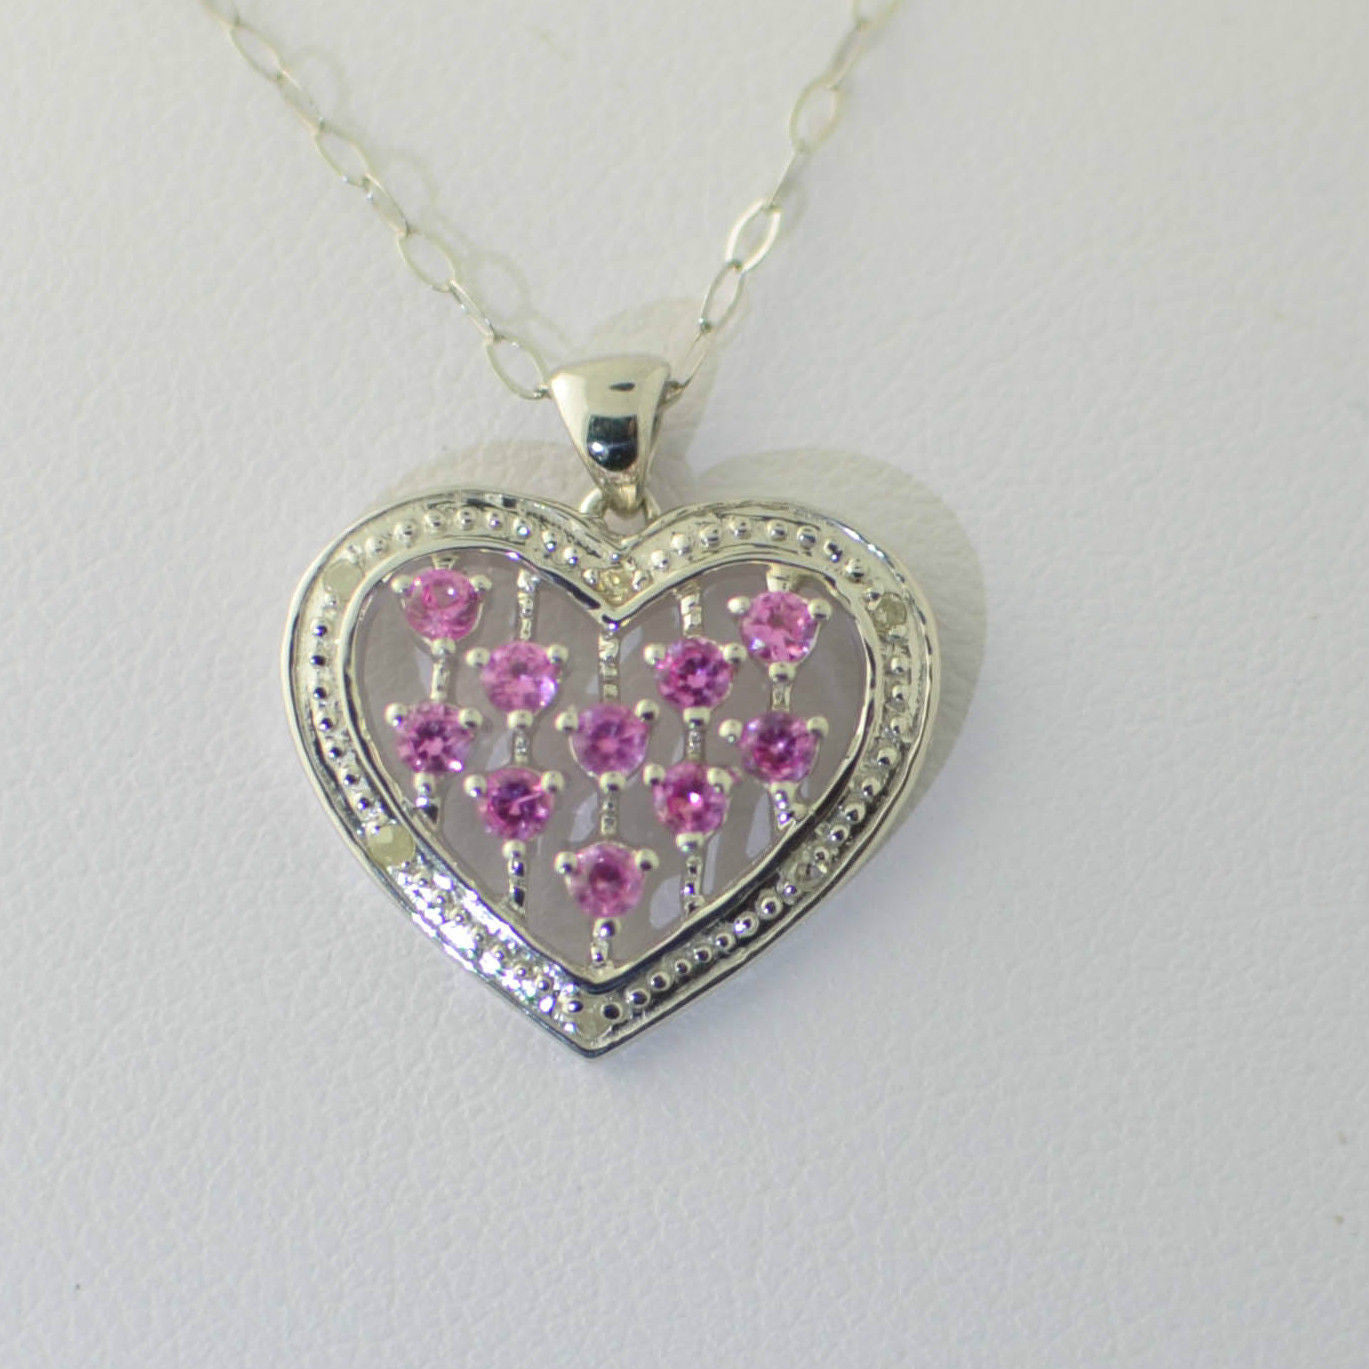 Pink Sapphire Heart Necklace 18KGP 925 Sterling Silver 